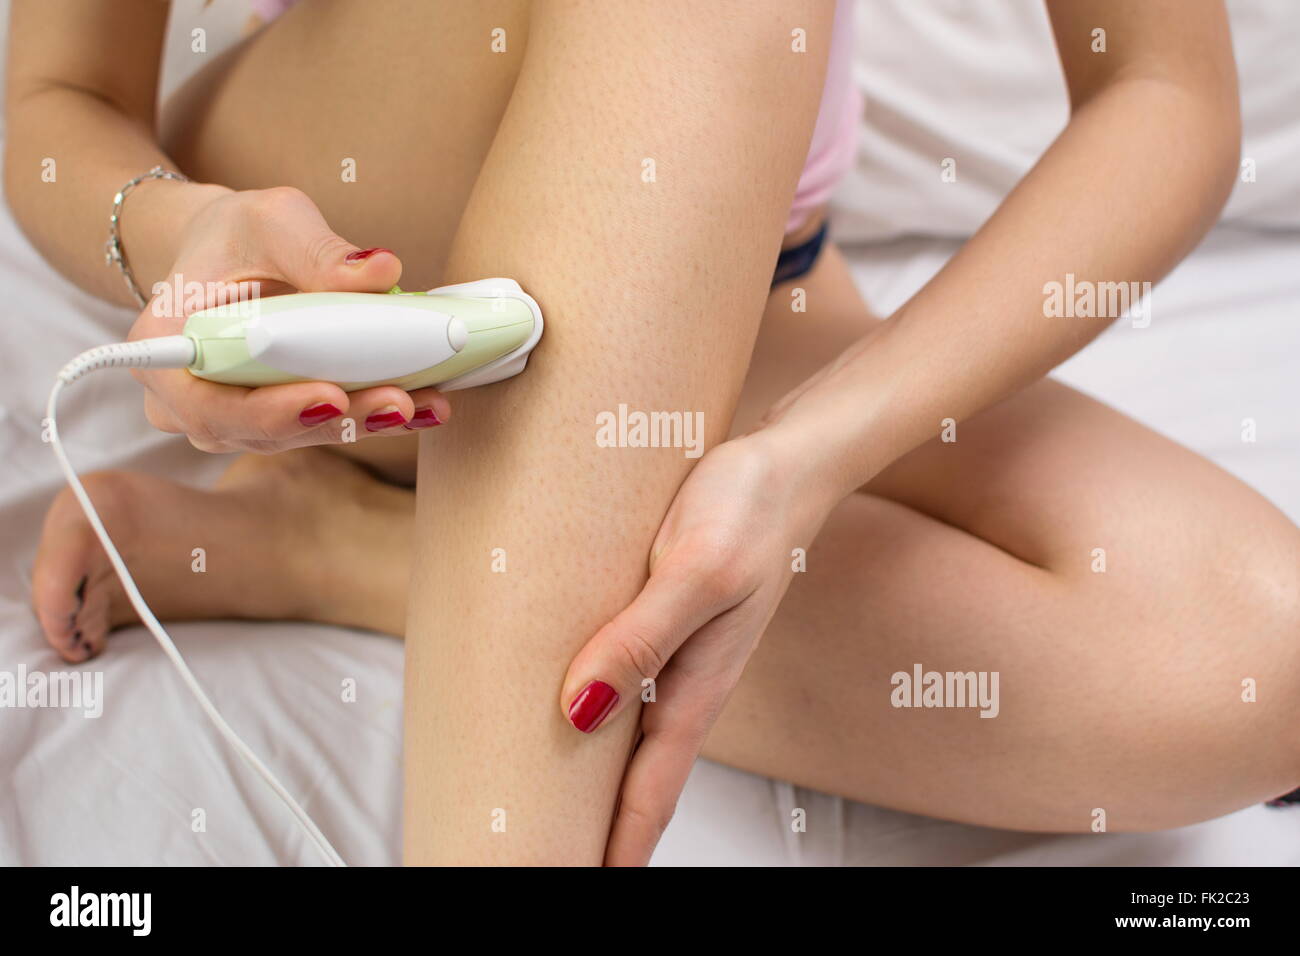 Girl epilates her leg with an epilator on the bed Stock Photo